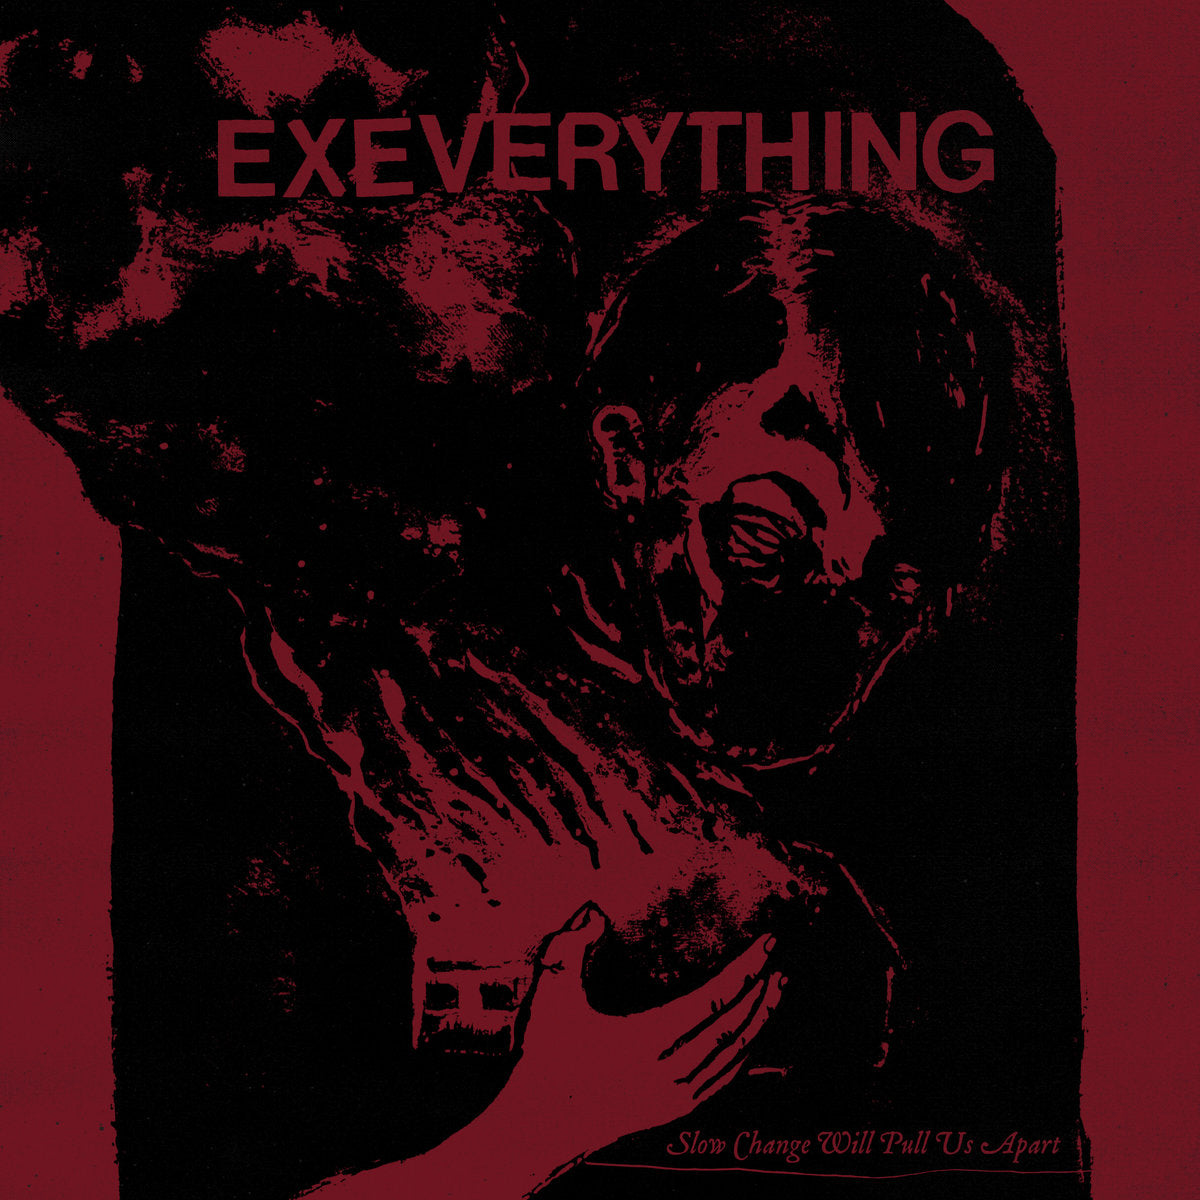 EX EVERYTHING "Slow Change Will Pull Us Apart" LP